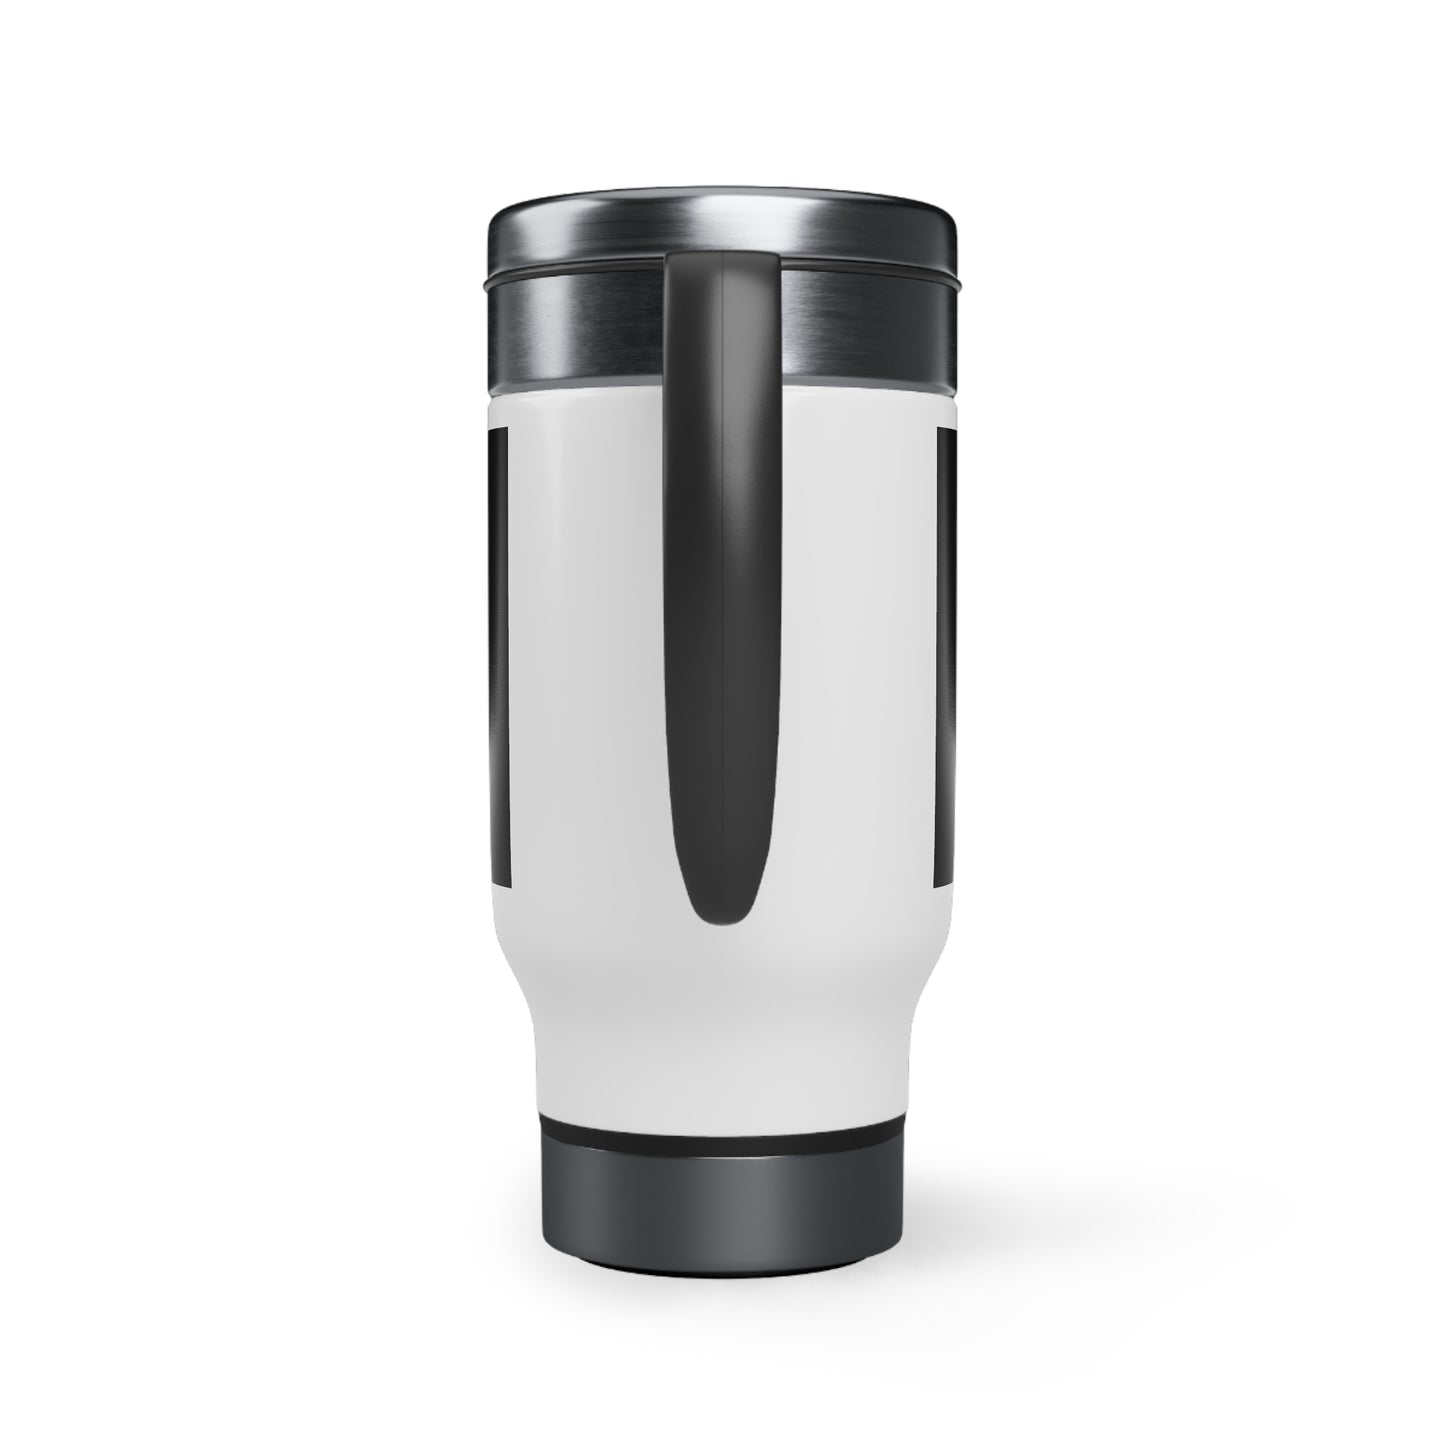 Proud Child Of A God Who Would Leave The 99 Looking For Me (2) Travel Mug with Handle, 14oz